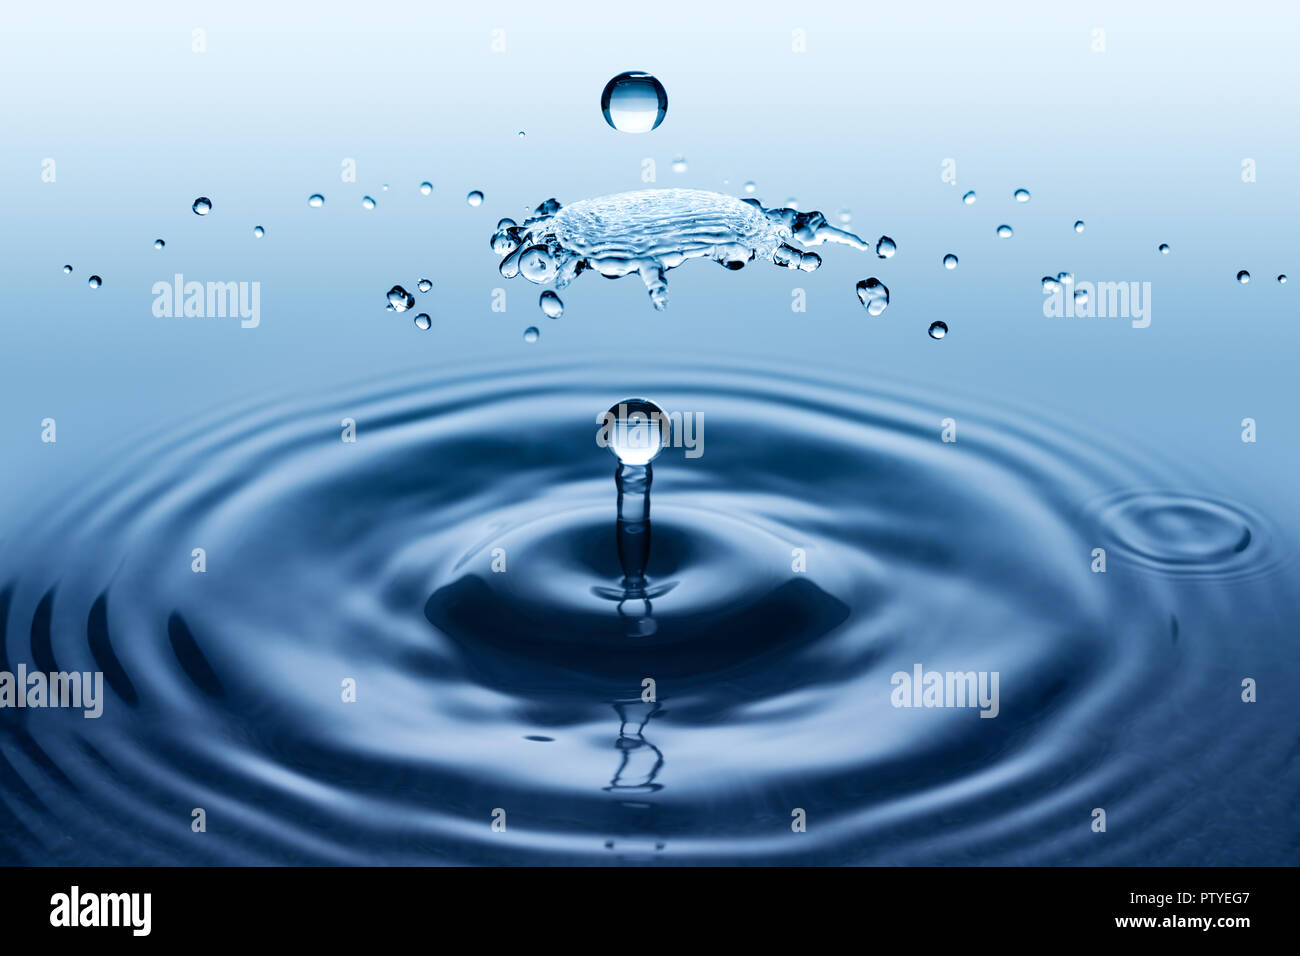 Water splatter and splash. Collision effect of two falling rain drops. Stock Photo